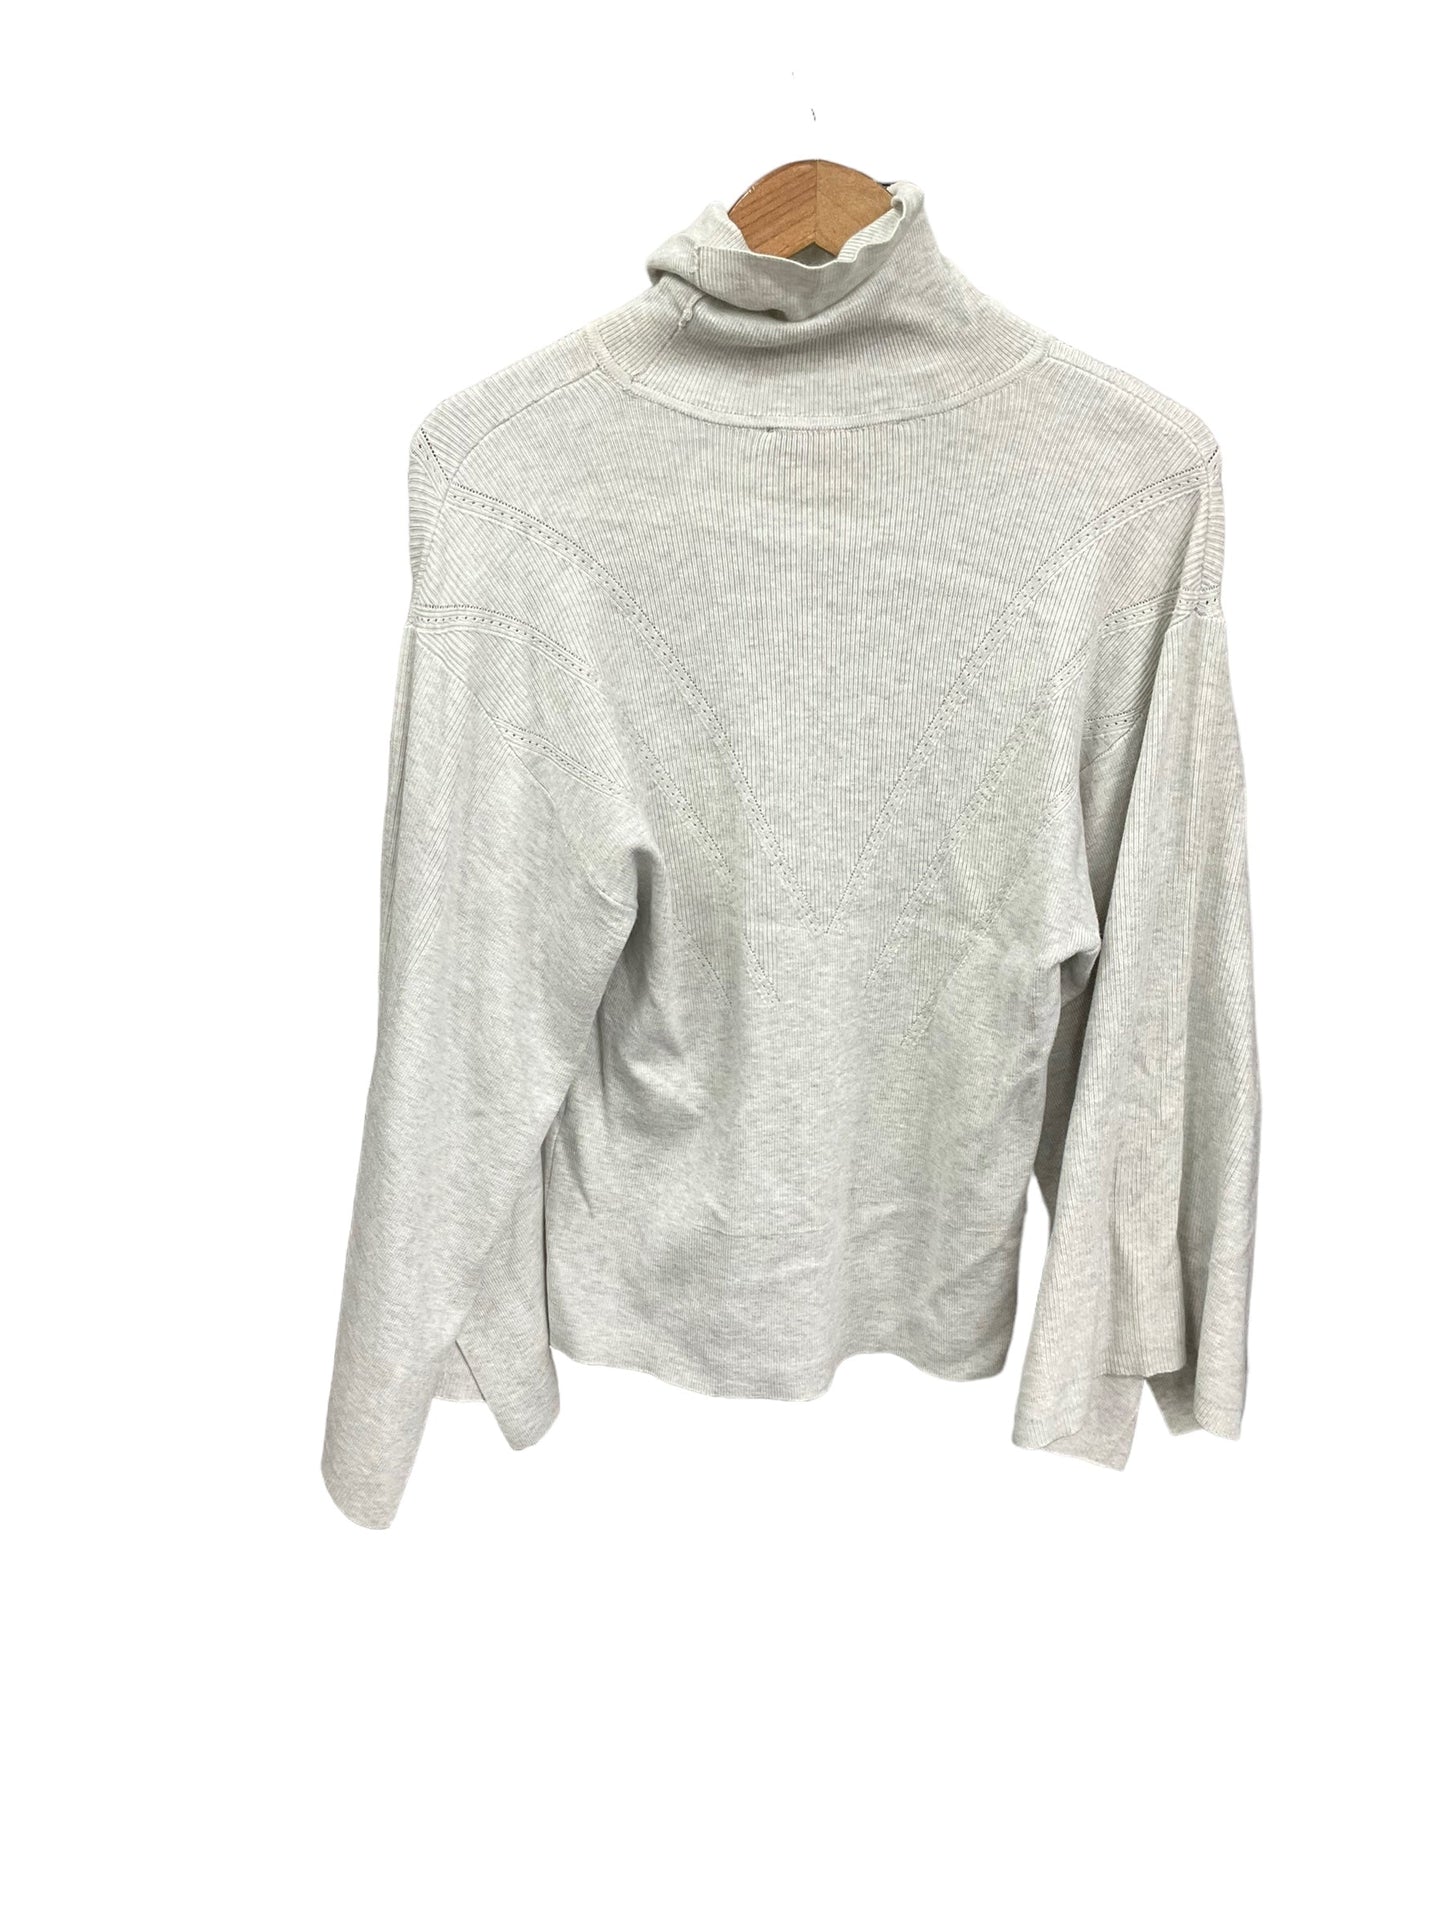 Sweater Cashmere By White House Black Market  Size: M